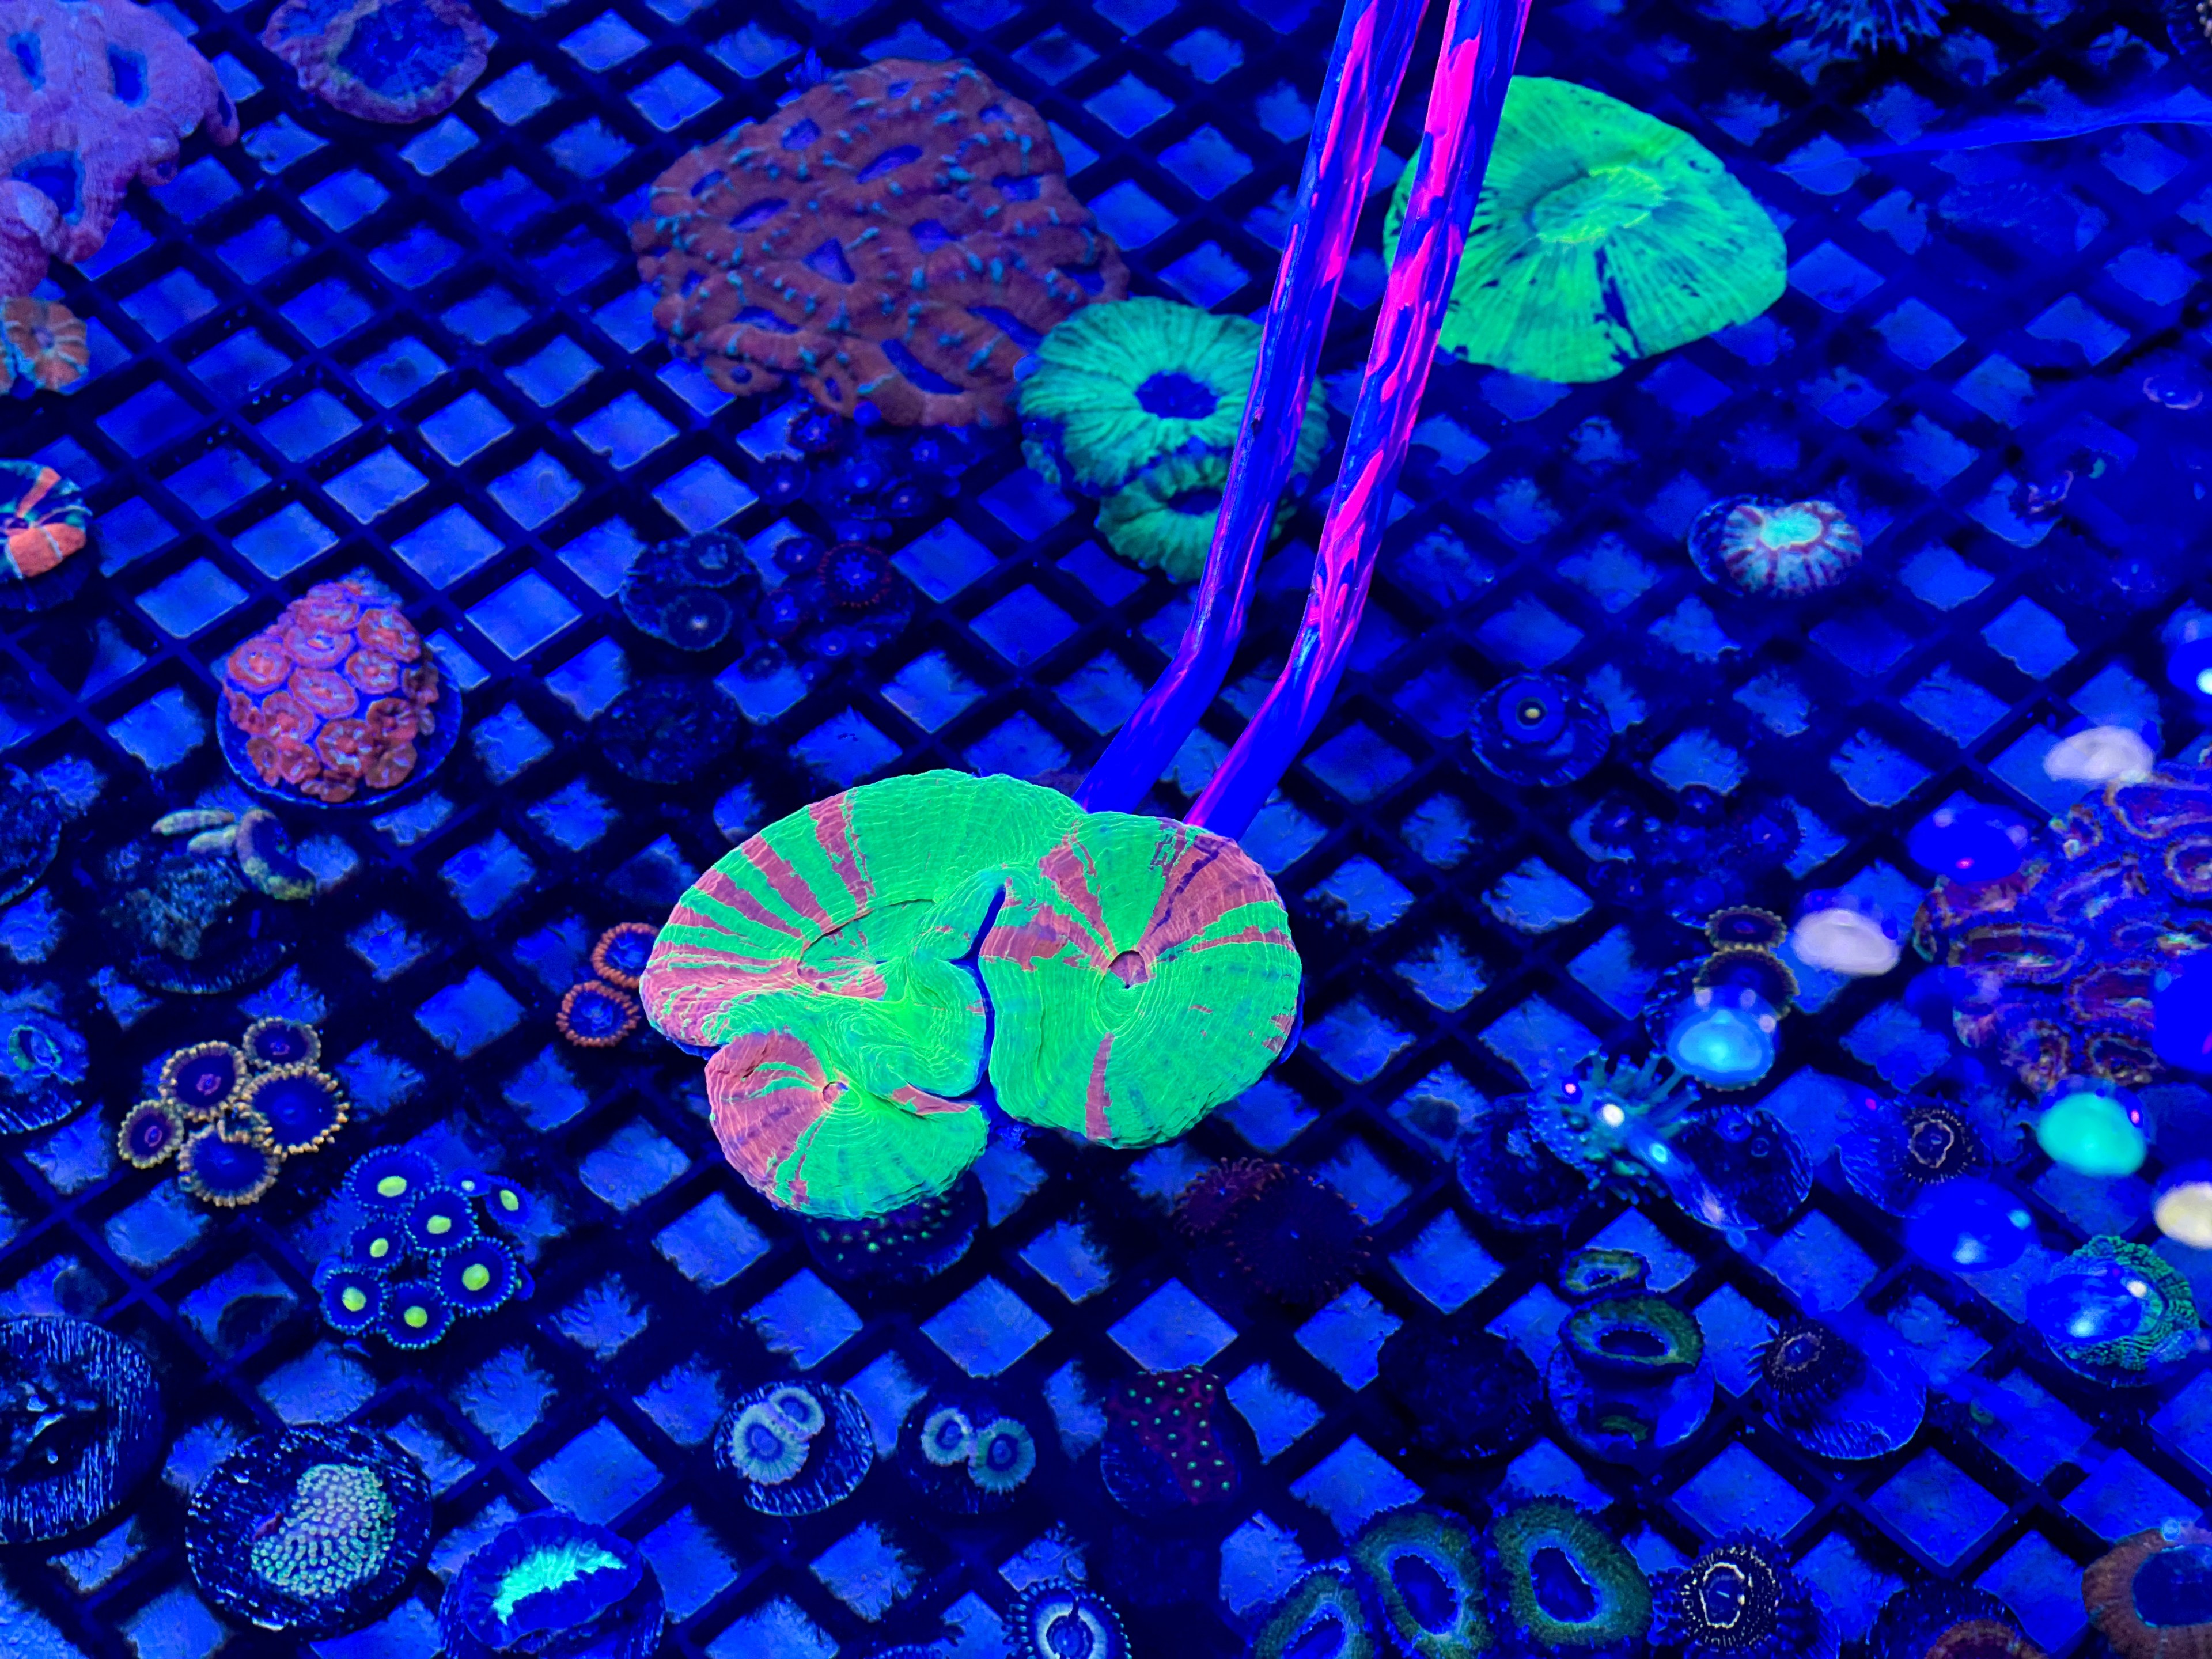 Vibrant coral and anemones under blue light, exhibiting neon colors on a grid-like aquarium floor.